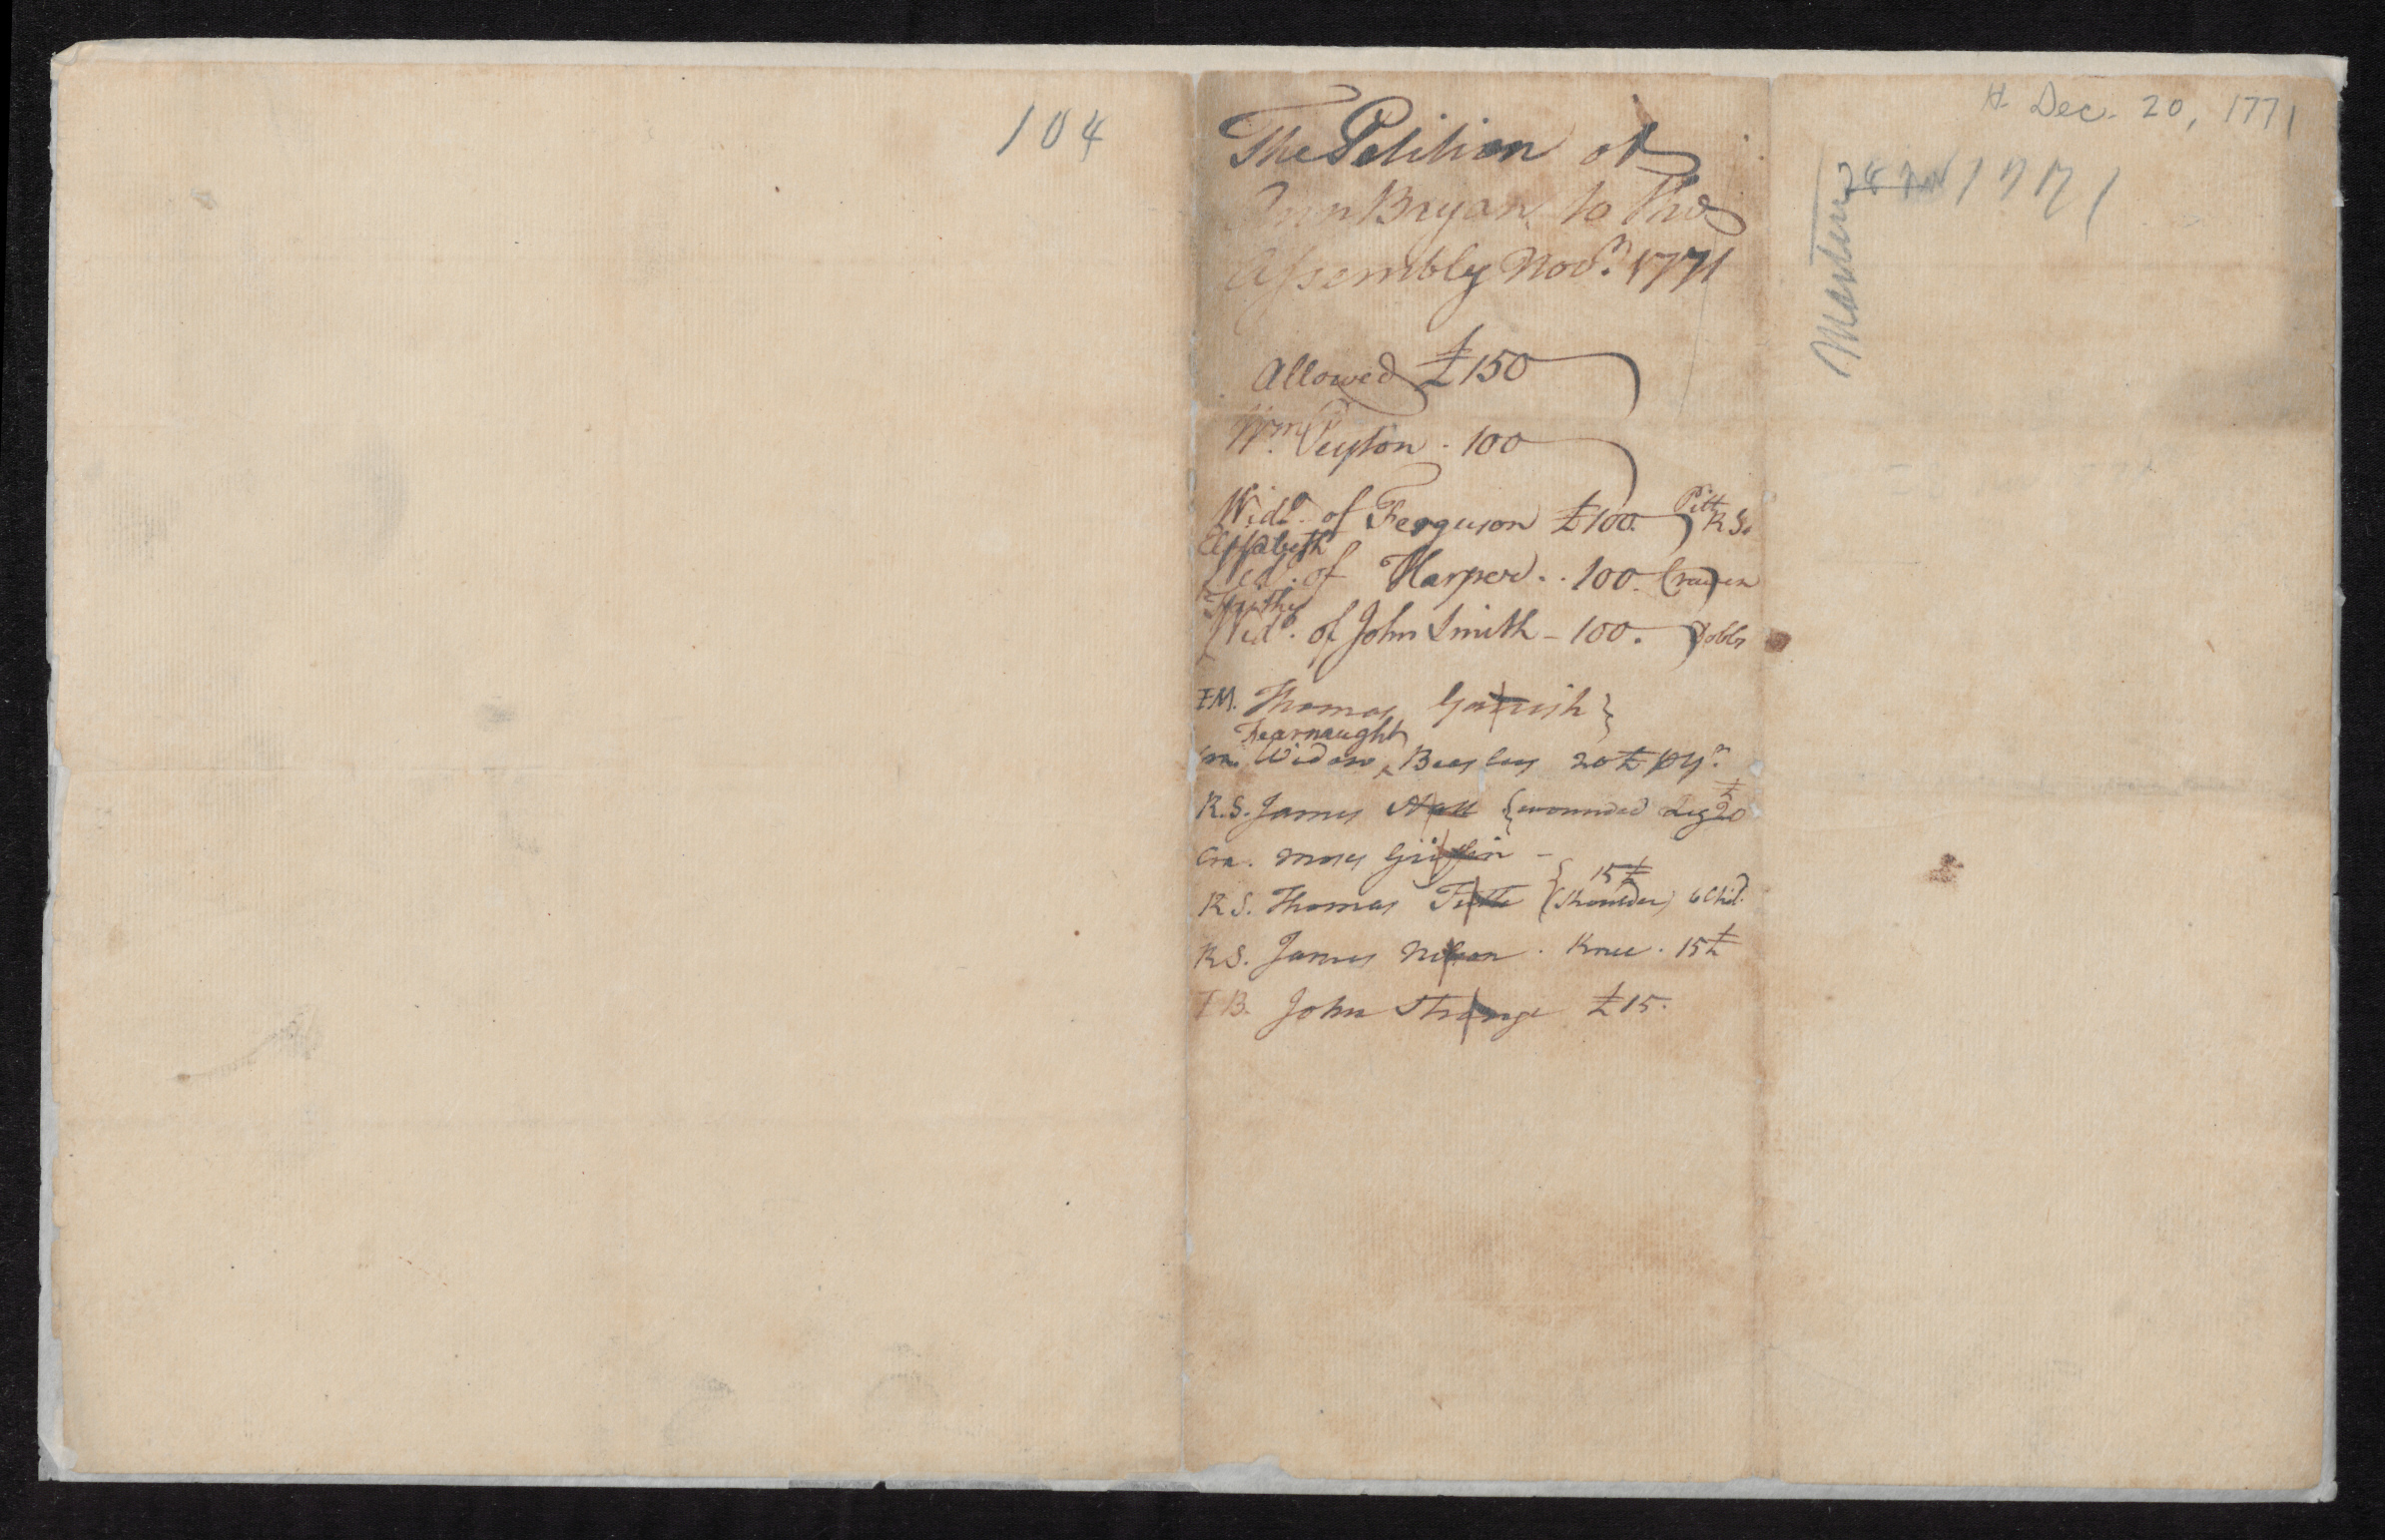 Petition from Ann Bryan to the North Carolina Colonial Assembly for a Pension, 28 November 1771, page 2.